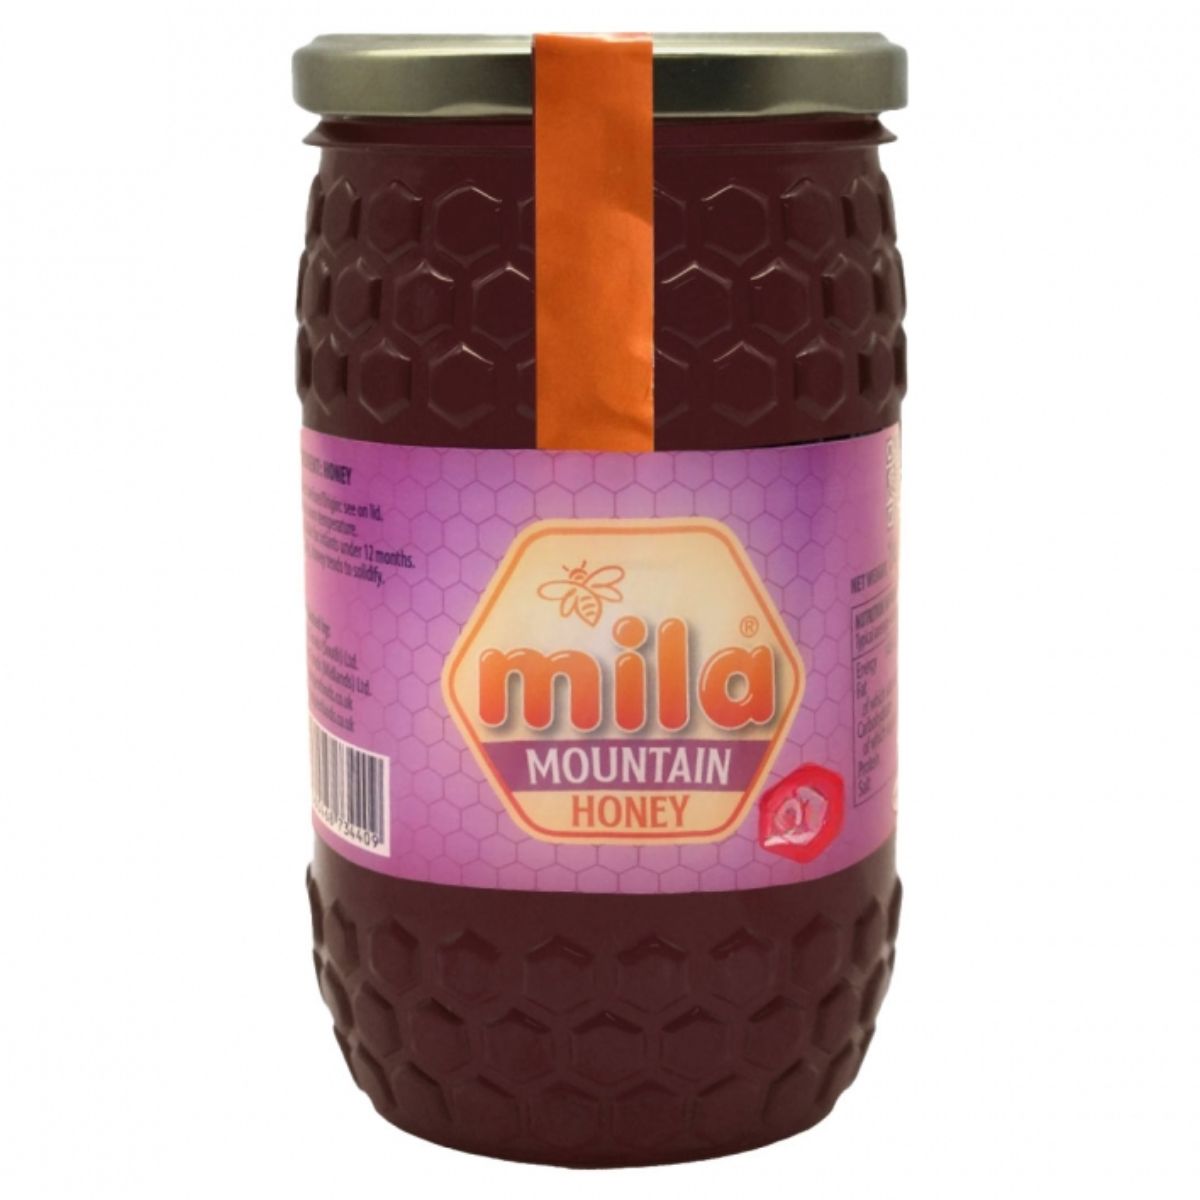 A Mila - Honey Mountain Glass Jar - 1kg with a honeycomb pattern and orange label.